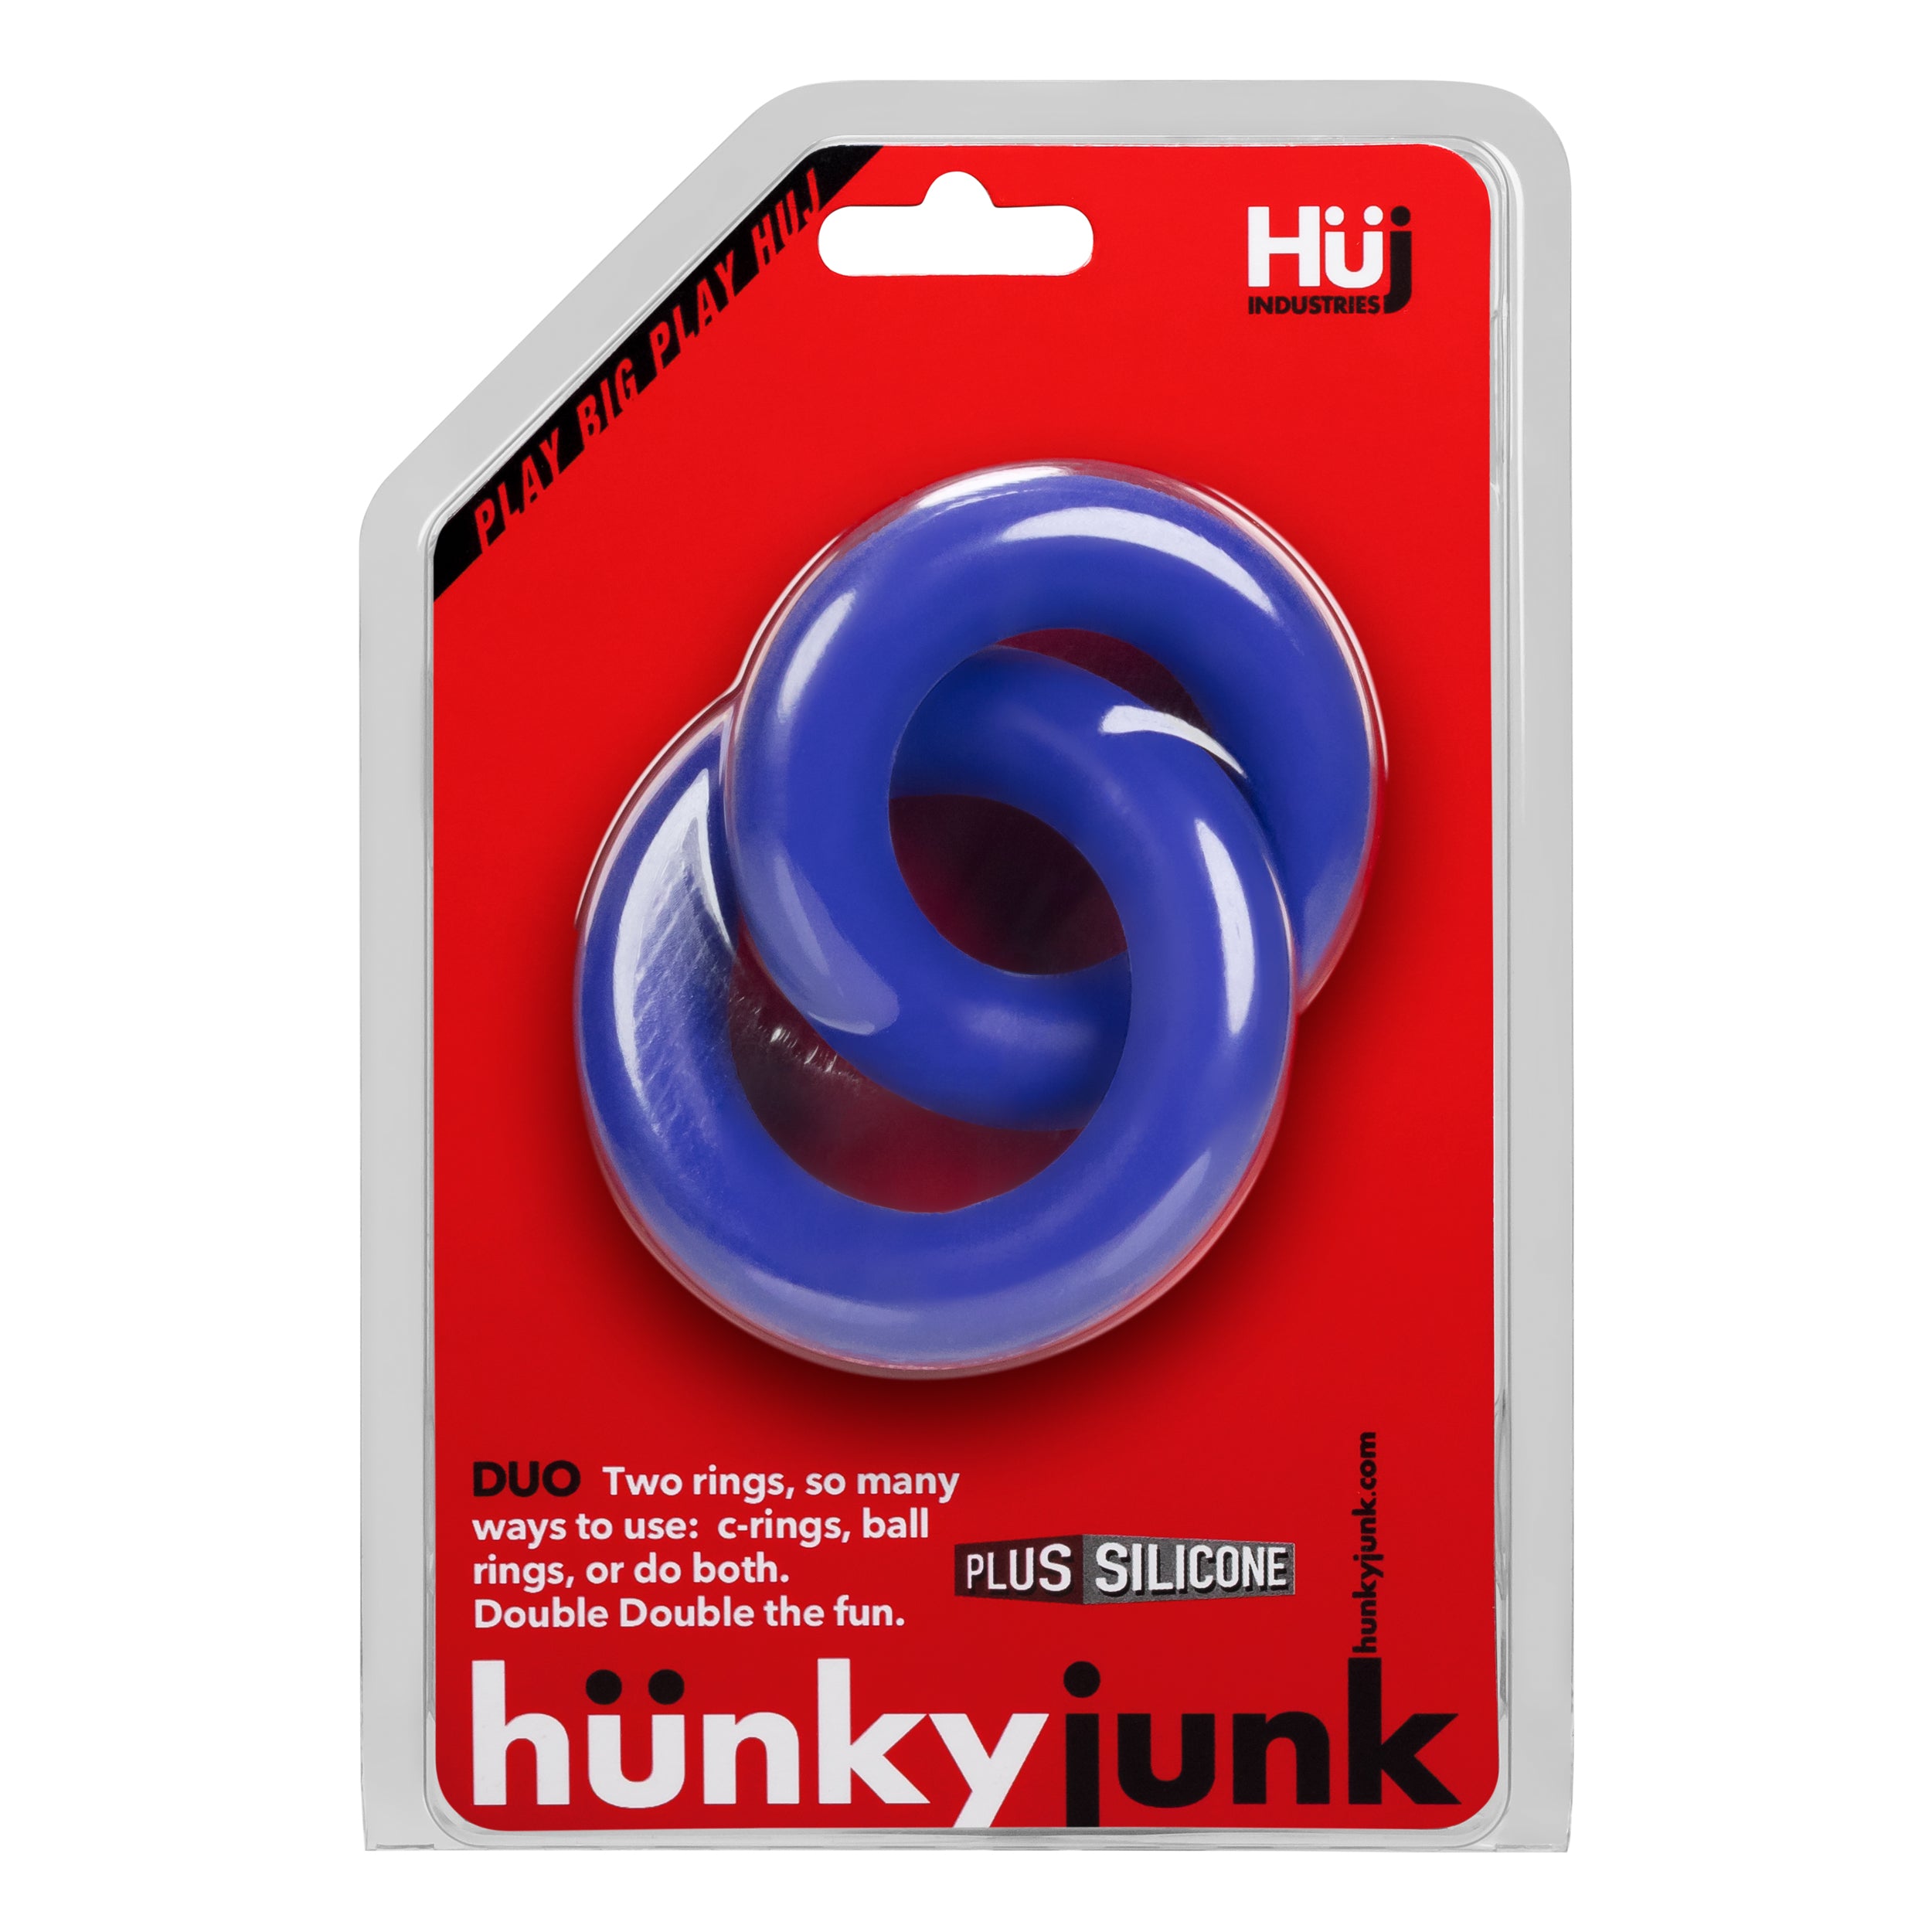 DUO Linked Cock/Ball Rings by Hunkyjunk Cobalt